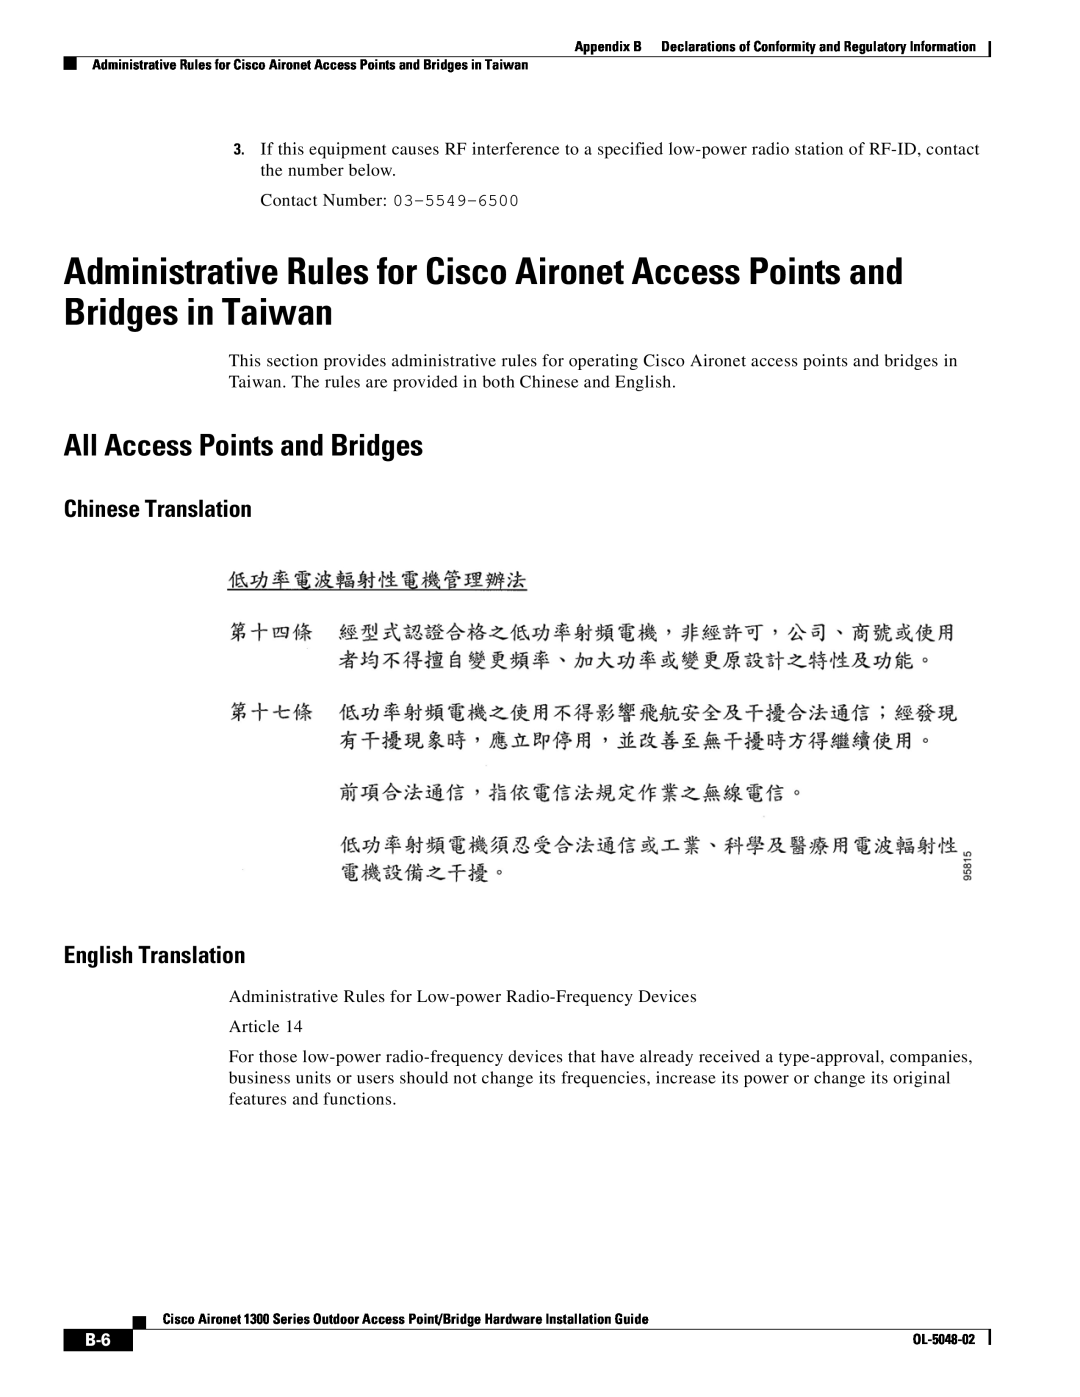 Cisco Systems 1300 Series manual All Access Points and Bridges, Chinese Translation English Translation 